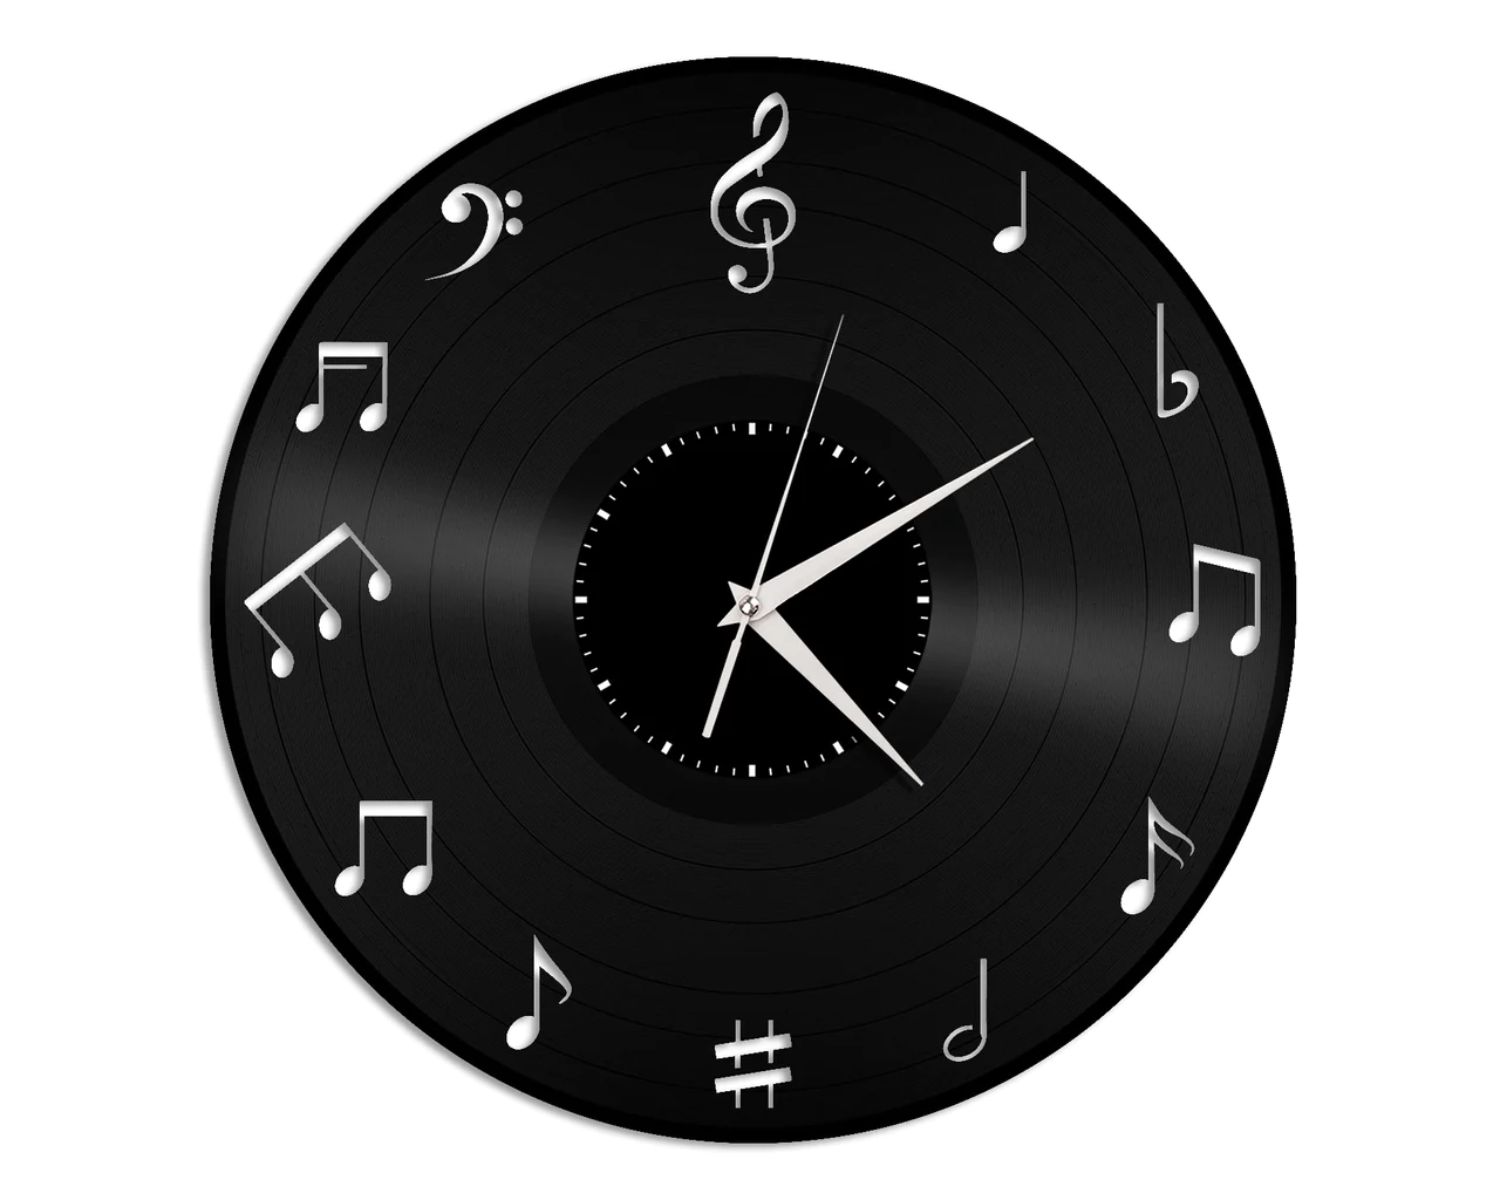 Melodic Timepiece: A Stylish Music-Themed Wall Clock for Him